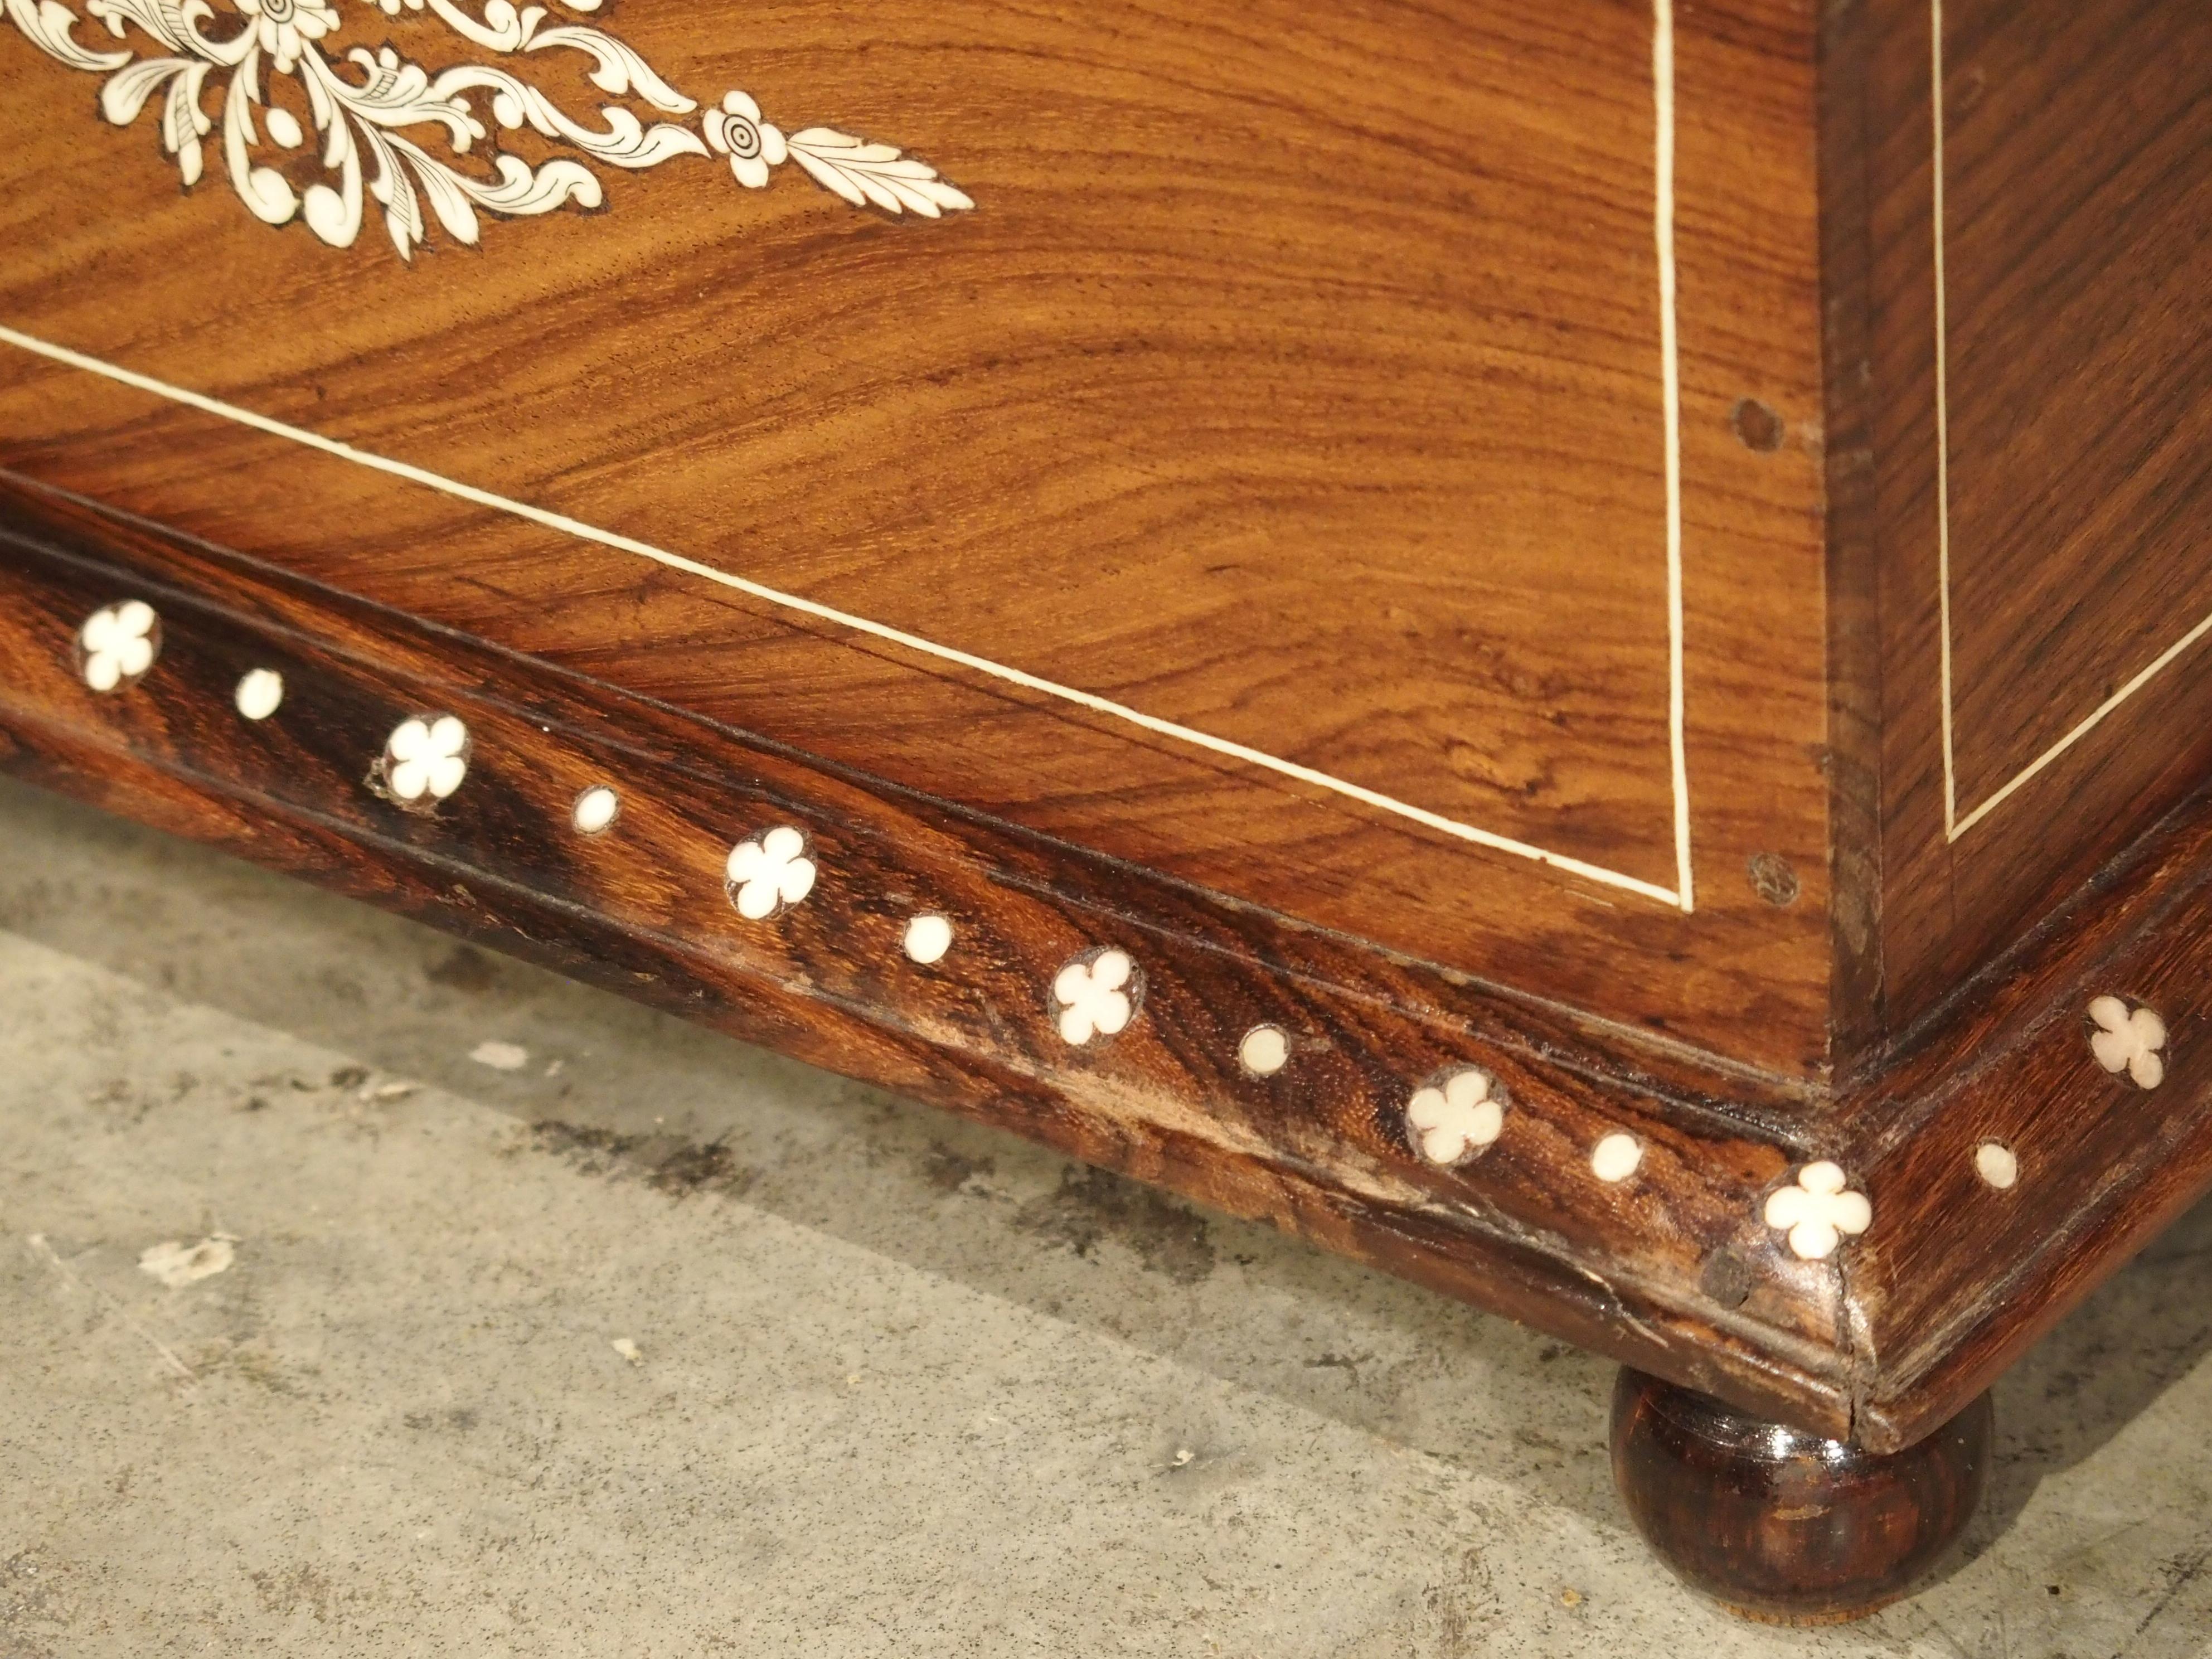 European Antique Bone Inlaid Table Trunk from Southern Iberia, 19th Century